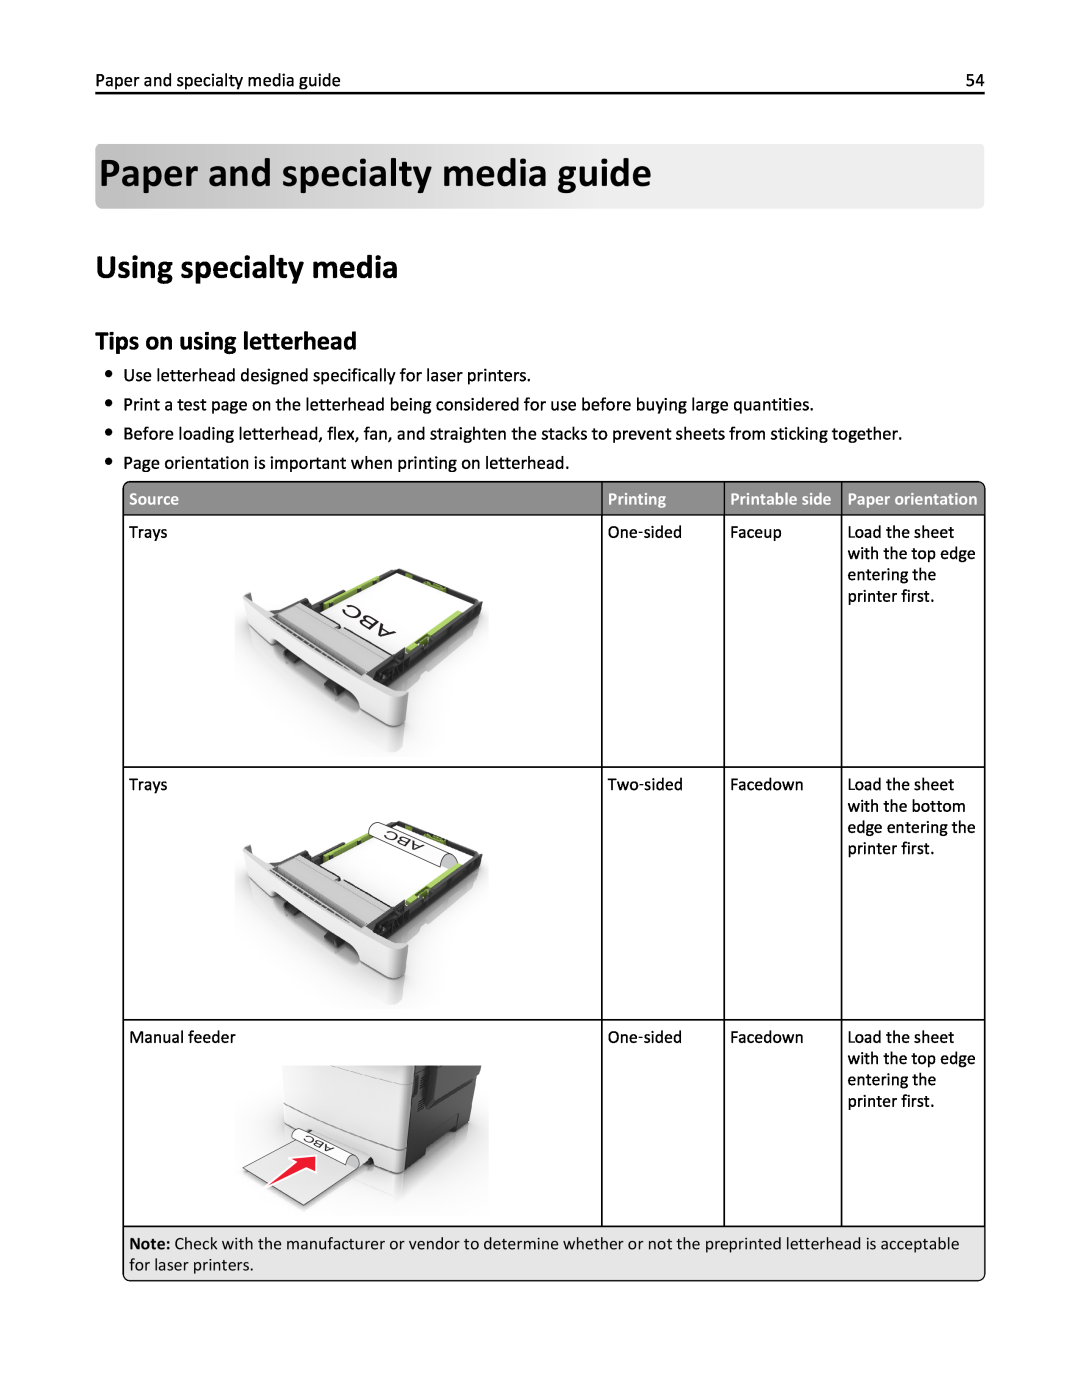 Lexmark 436 manual Paper andspecialty mediaguide, Using specialty media, Tips on using letterhead 